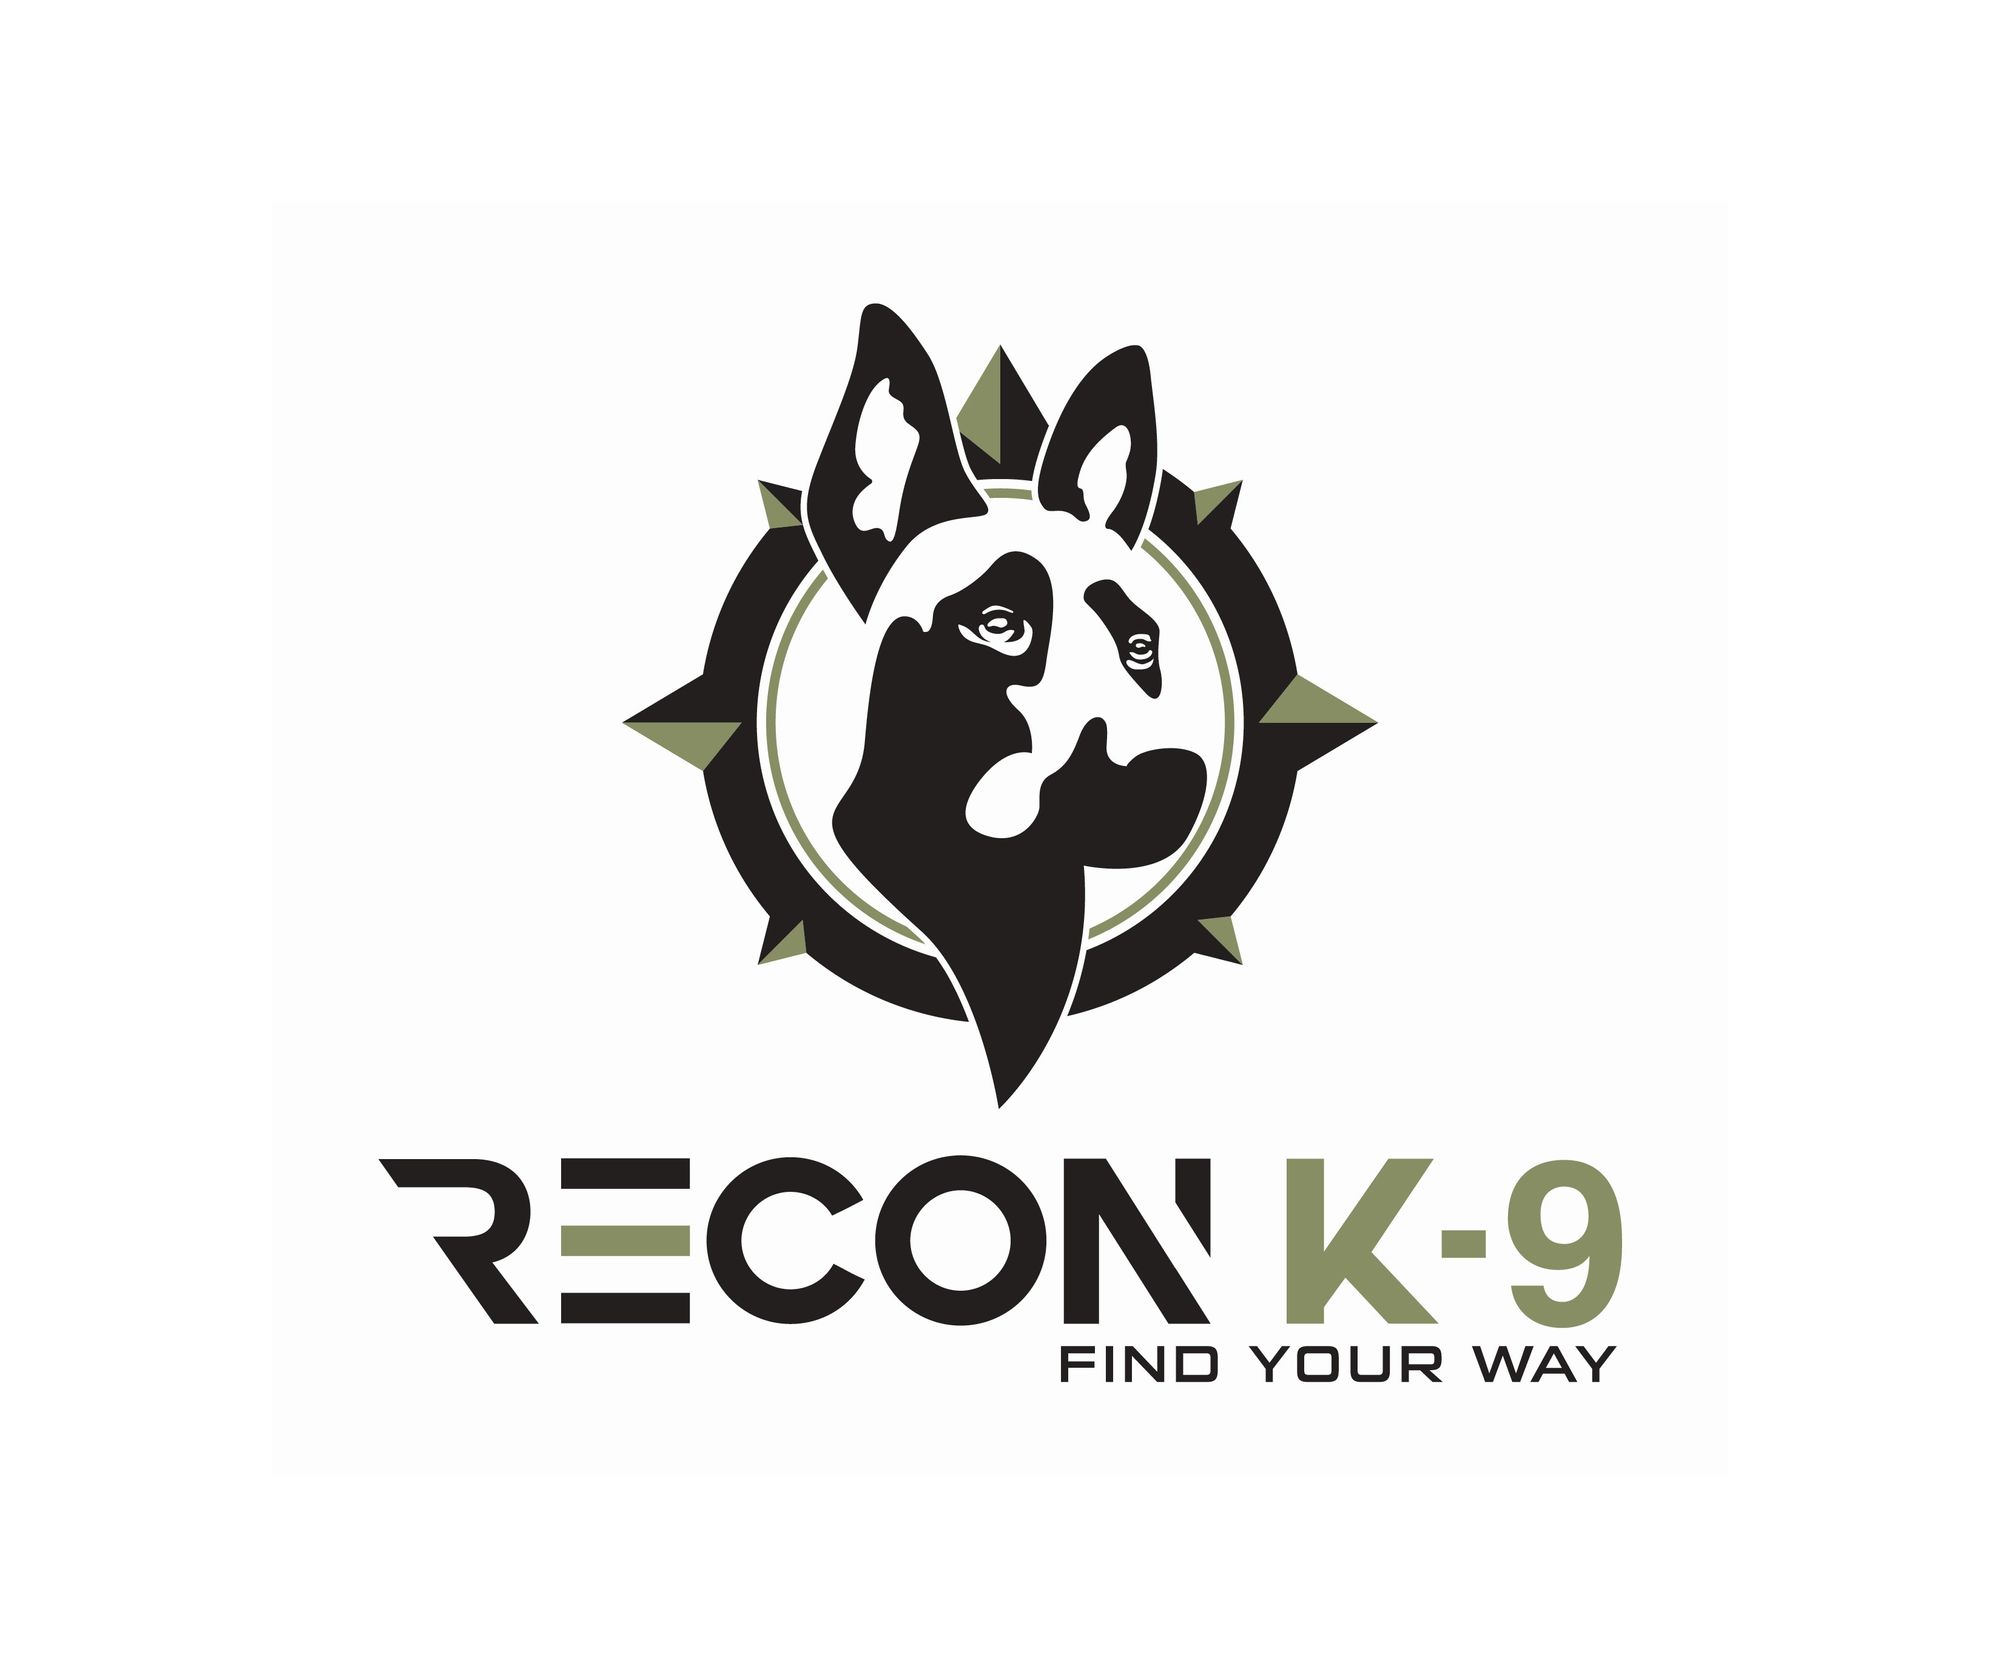 Find Your Way - Recon K9